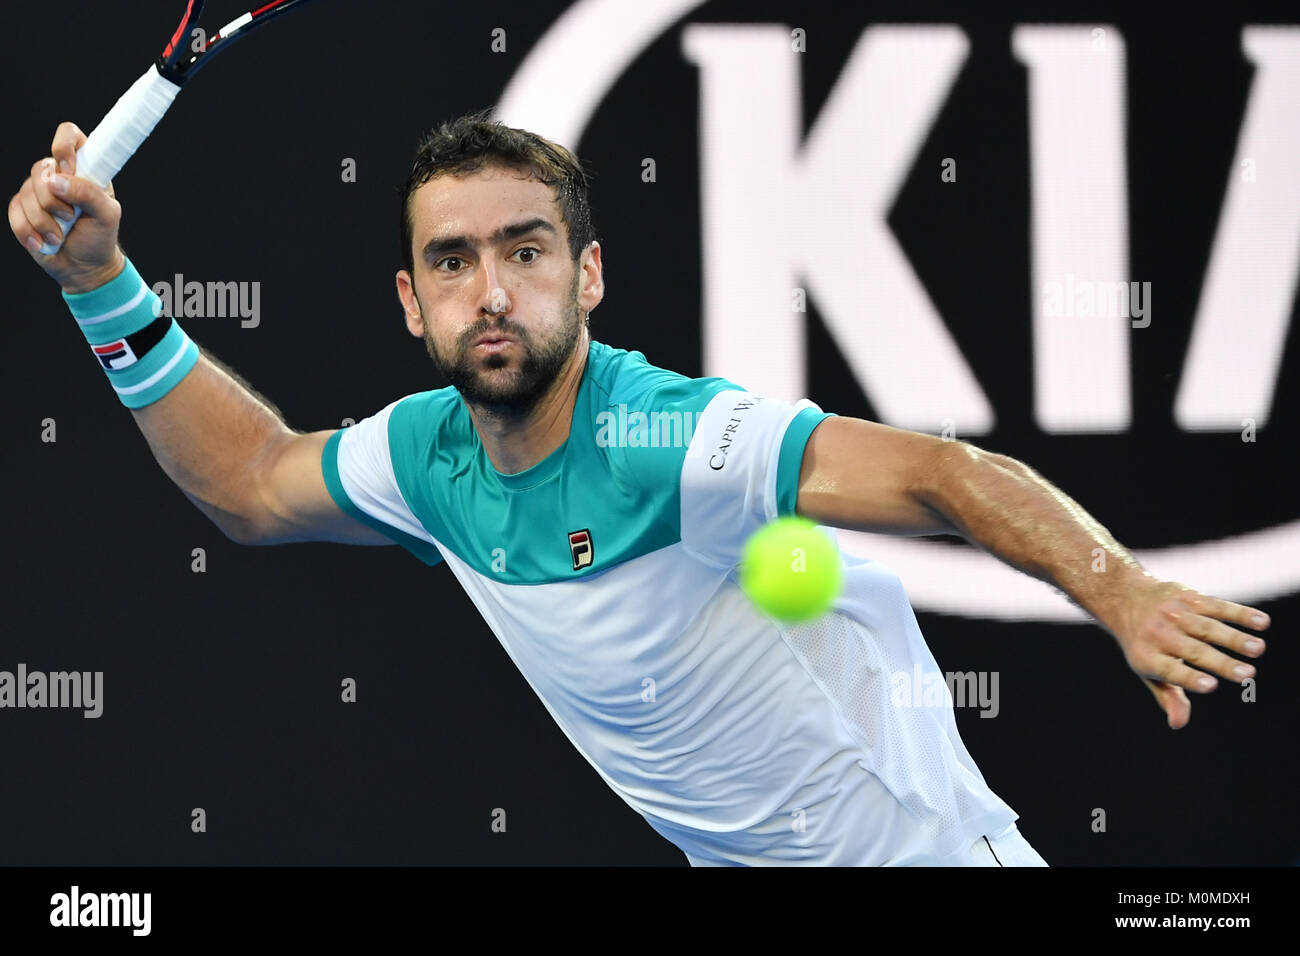 Melbourne, Australia. 23rd Jan, 2018. Number six seed Marin Cilic of Croatia in action in a Quarterfinals match against number one seed Rafael Nadal of Spain on day nine of the 2018 Australian Open Grand Slam tennis tournament in Melbourne, Australia. Sydney Low/Cal Sport Media/Alamy Live News Stock Photo